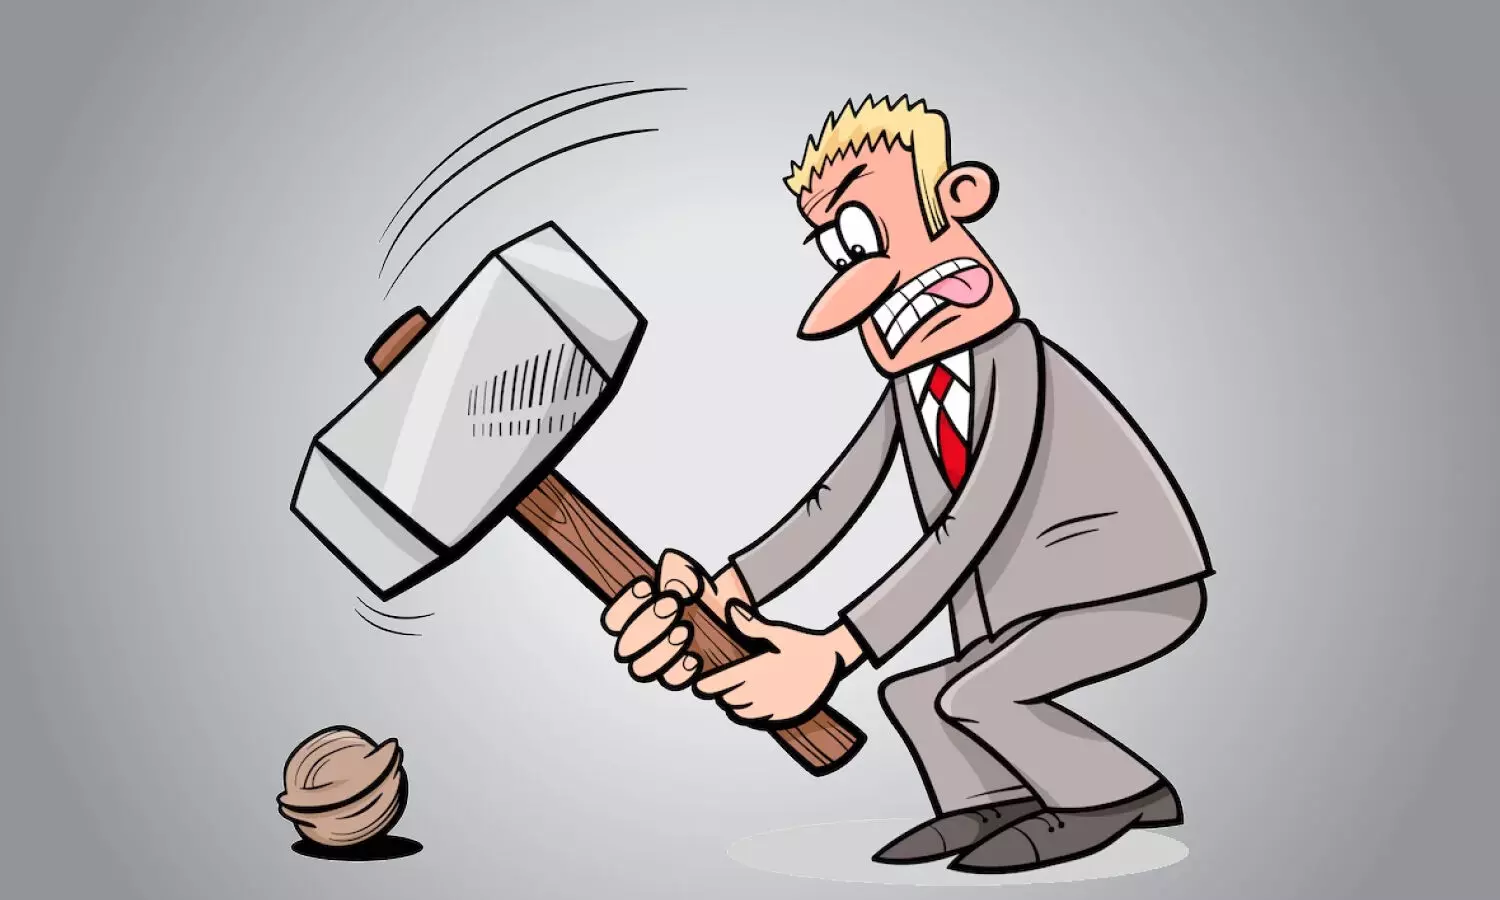 Cracking nuts with Sledgehammers?  SEBI’s Fit and Proper Criteria for Intermediaries